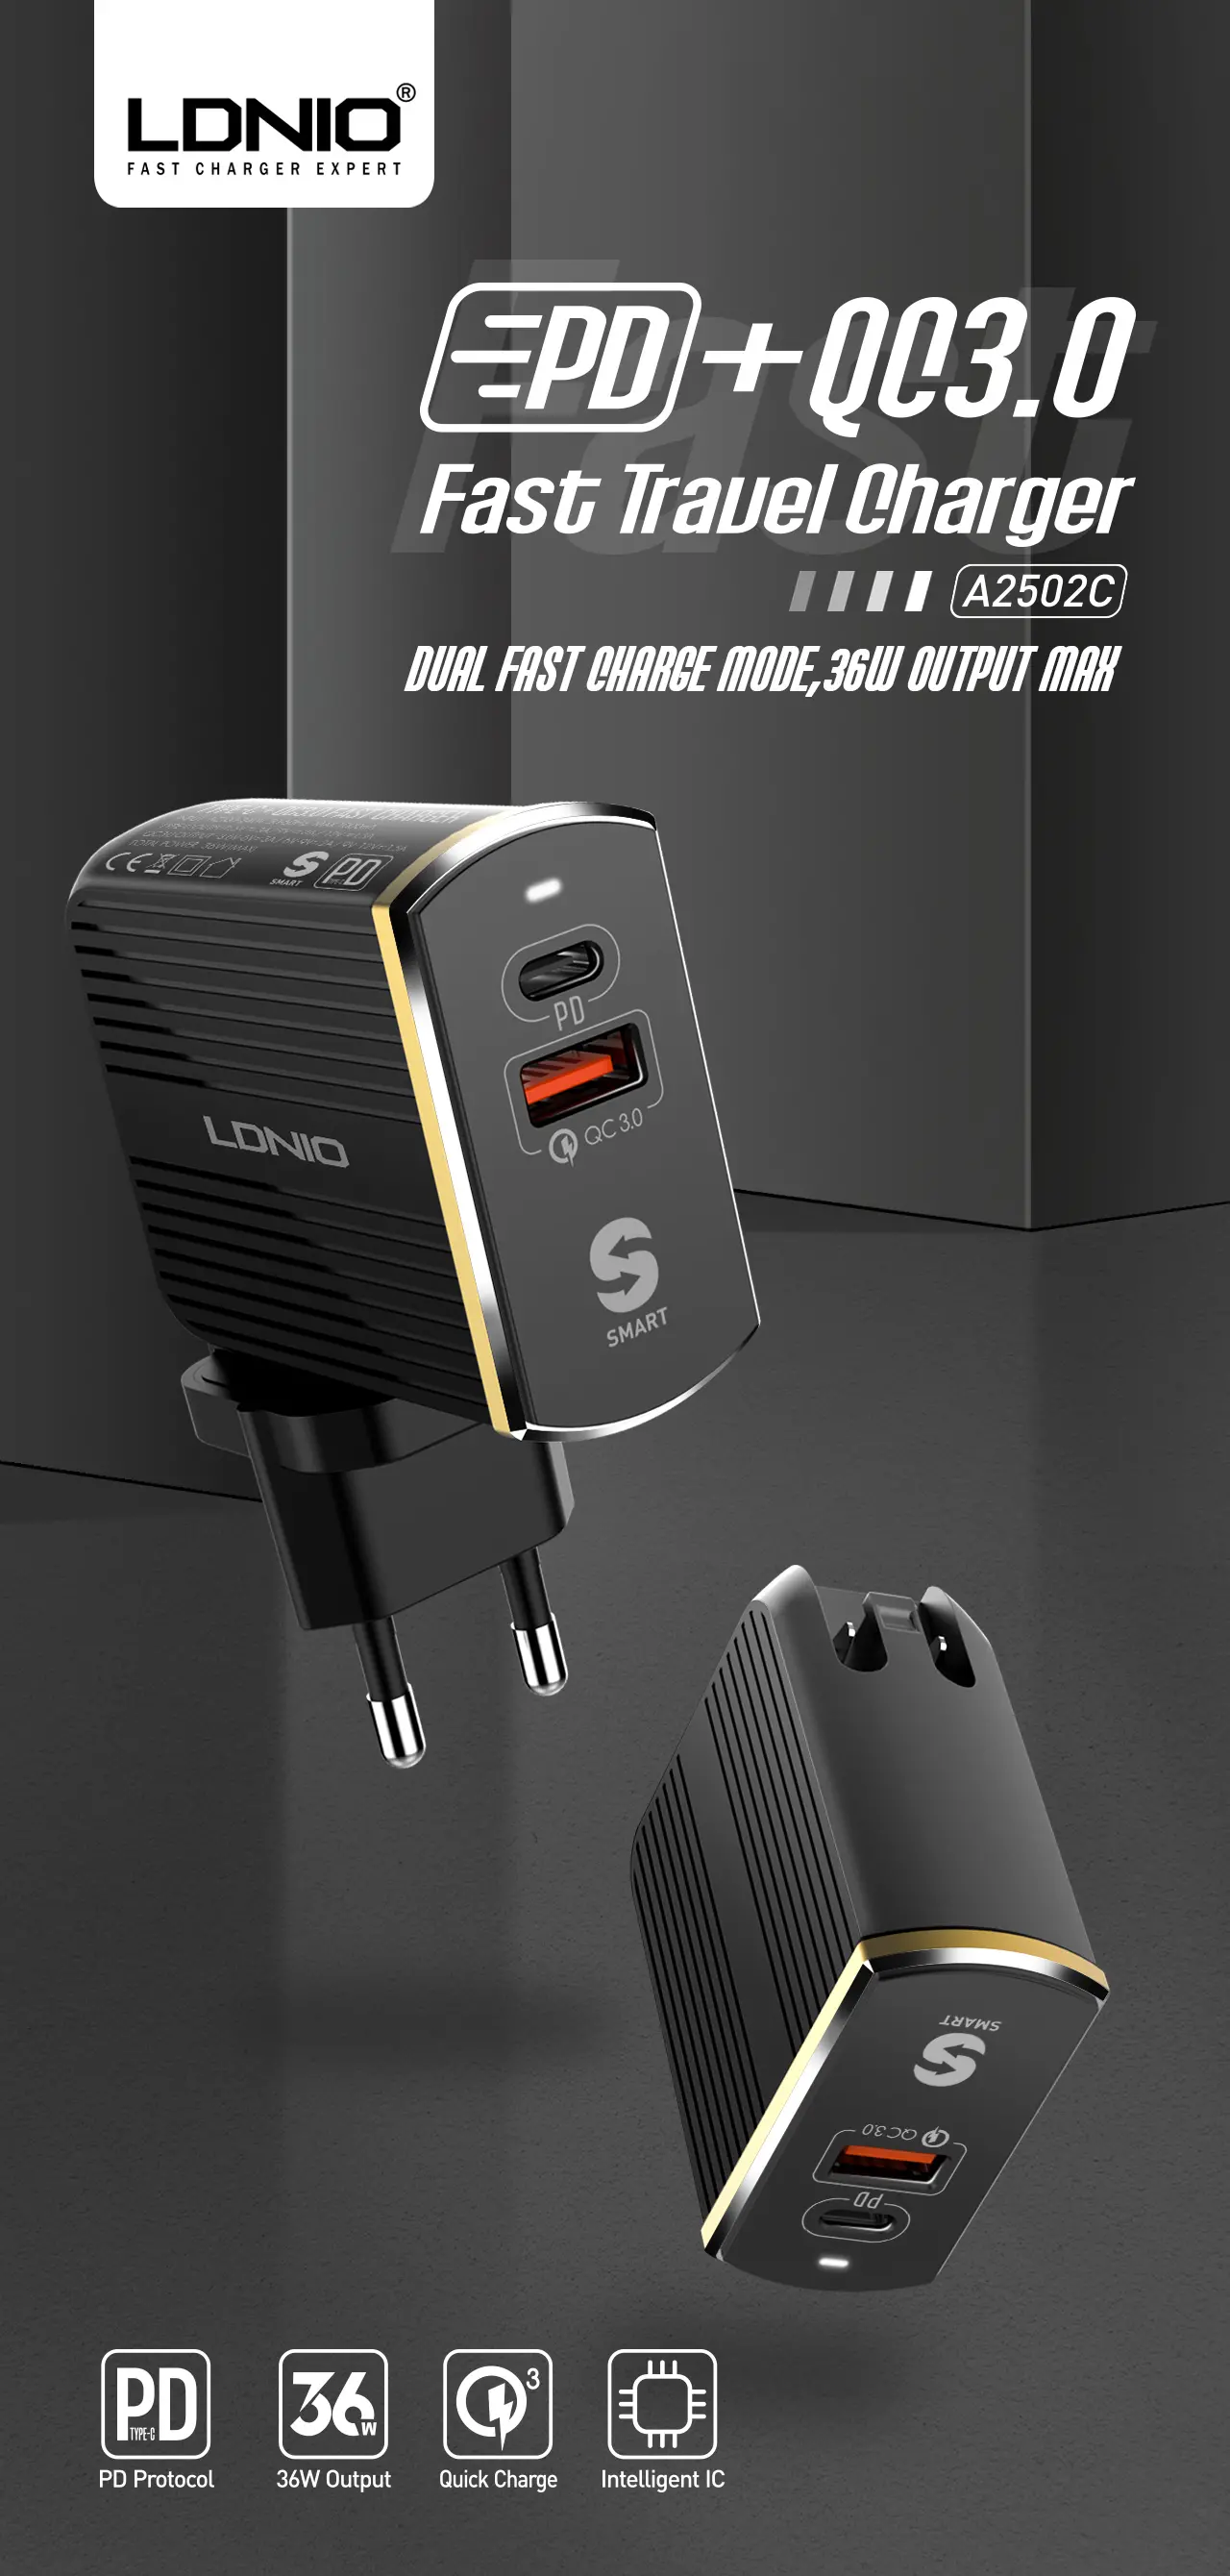 4cb01d05 8518 4467 9677 52c016fa2d5a.jpg LDNIO A2502C EU Plug QC3.0 USB + Type-C Fast Travel USB Charger